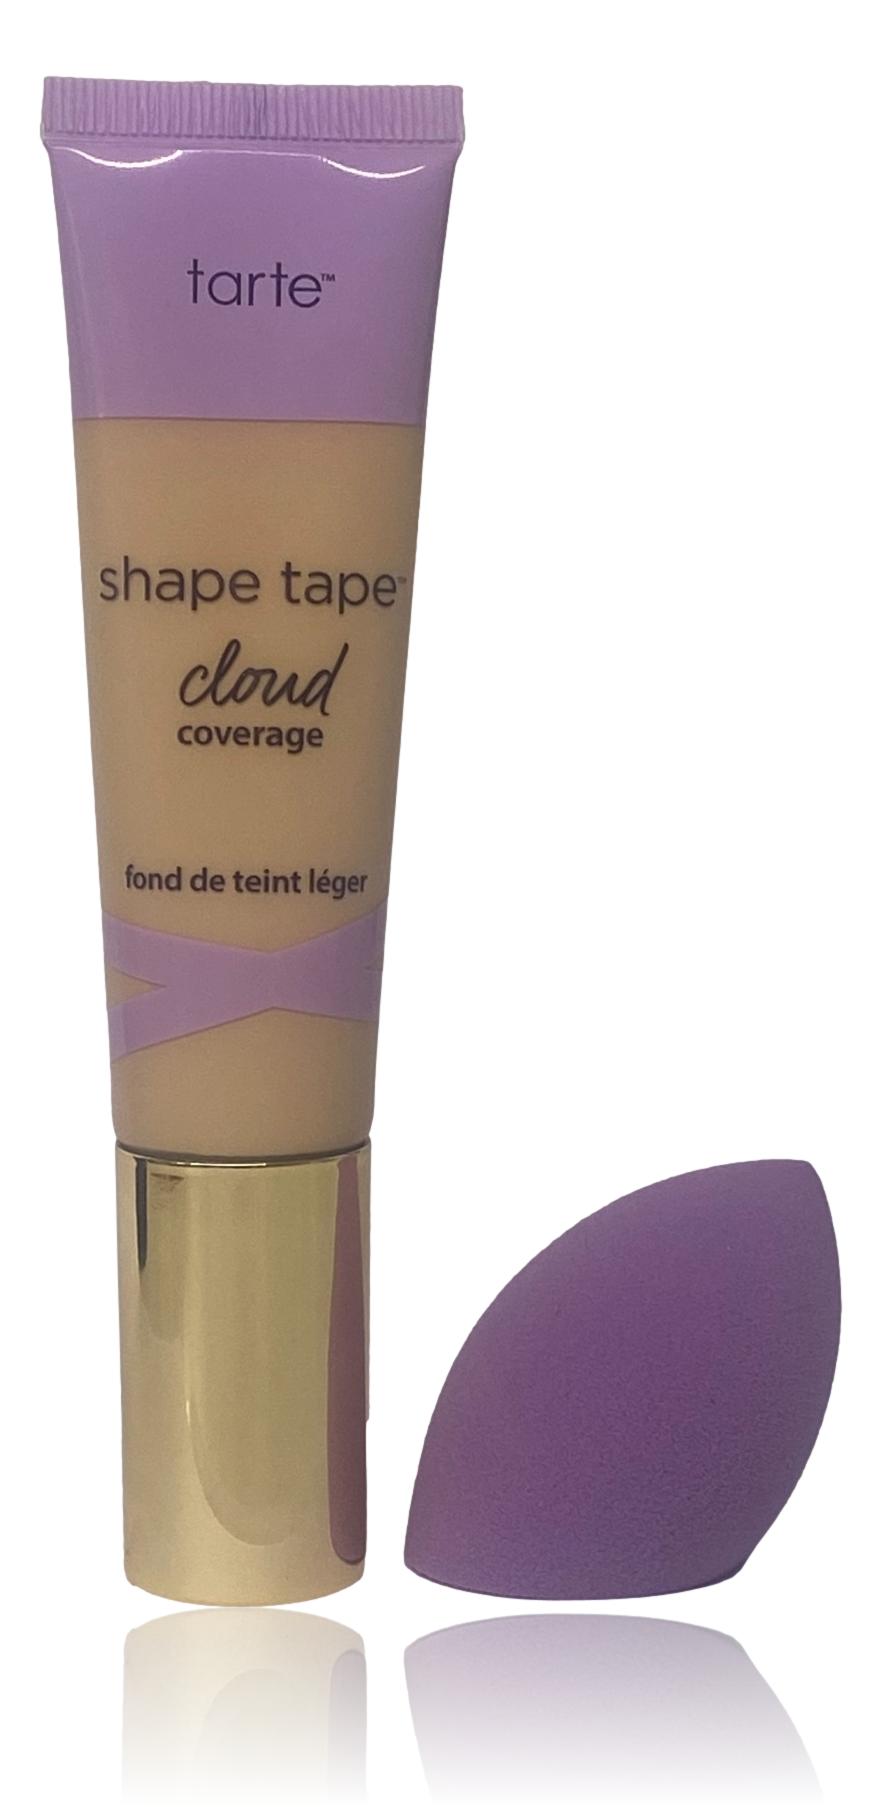 SEPHORA - Three reasons we're obsessing over the NEW Shape Tape™ Cloud  Foundation by @tartecosmetics. ☁️ Bouncy, cloud-like texture feels comfy &  weightless ☁️ Tape™ technology smooths & blurs imperfections ☁️ Natural